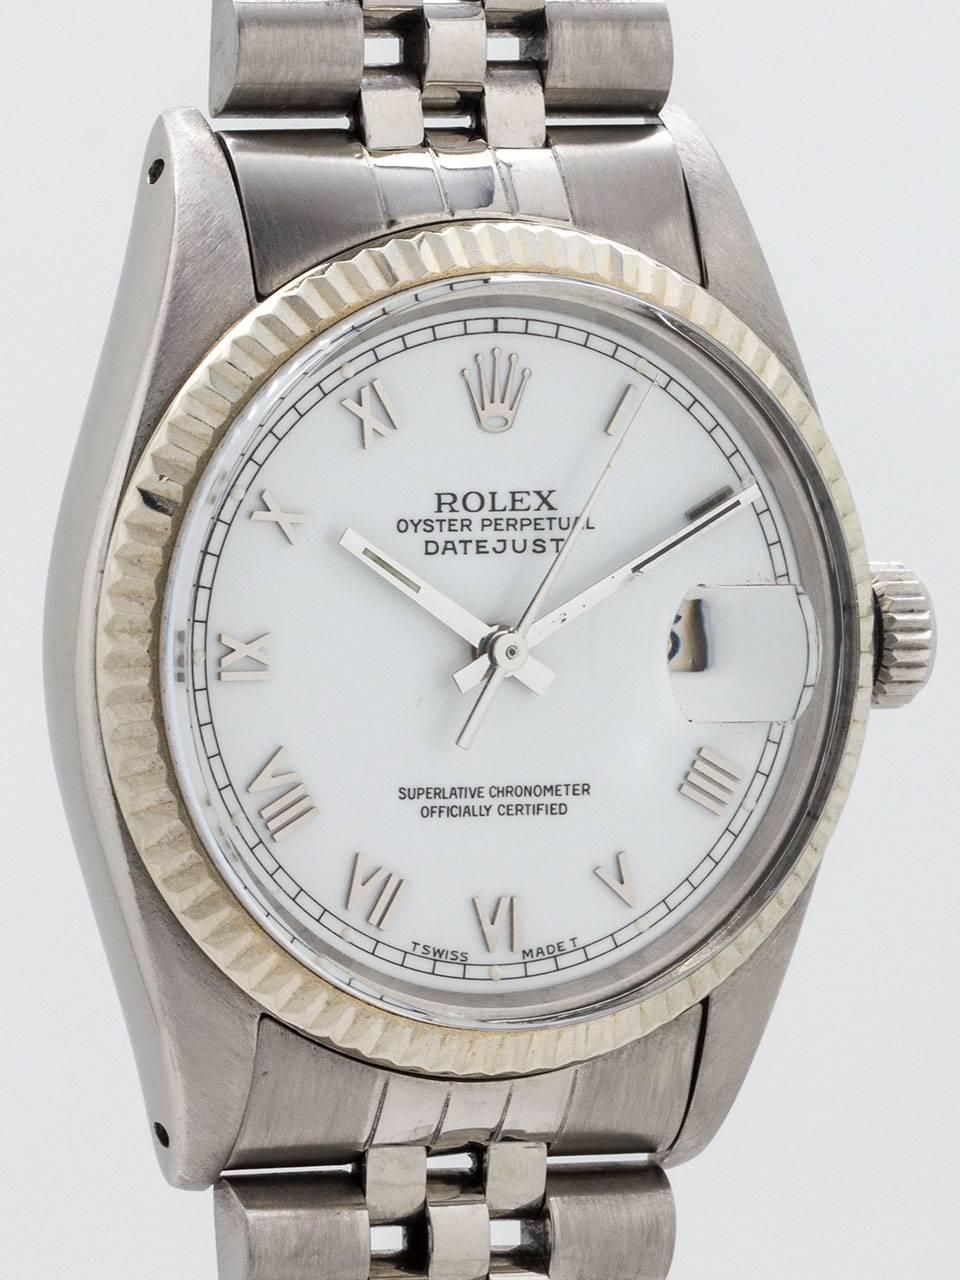 Rolex Stainless Steel Datejust ref 16014 serial number 6.5 million circa 1980. 36mm diameter case with 18K white gold fluted bezel and acrylic crystal. Featuring a white enamel dial with applied silver Roman indexes and silver baton hands. Powered